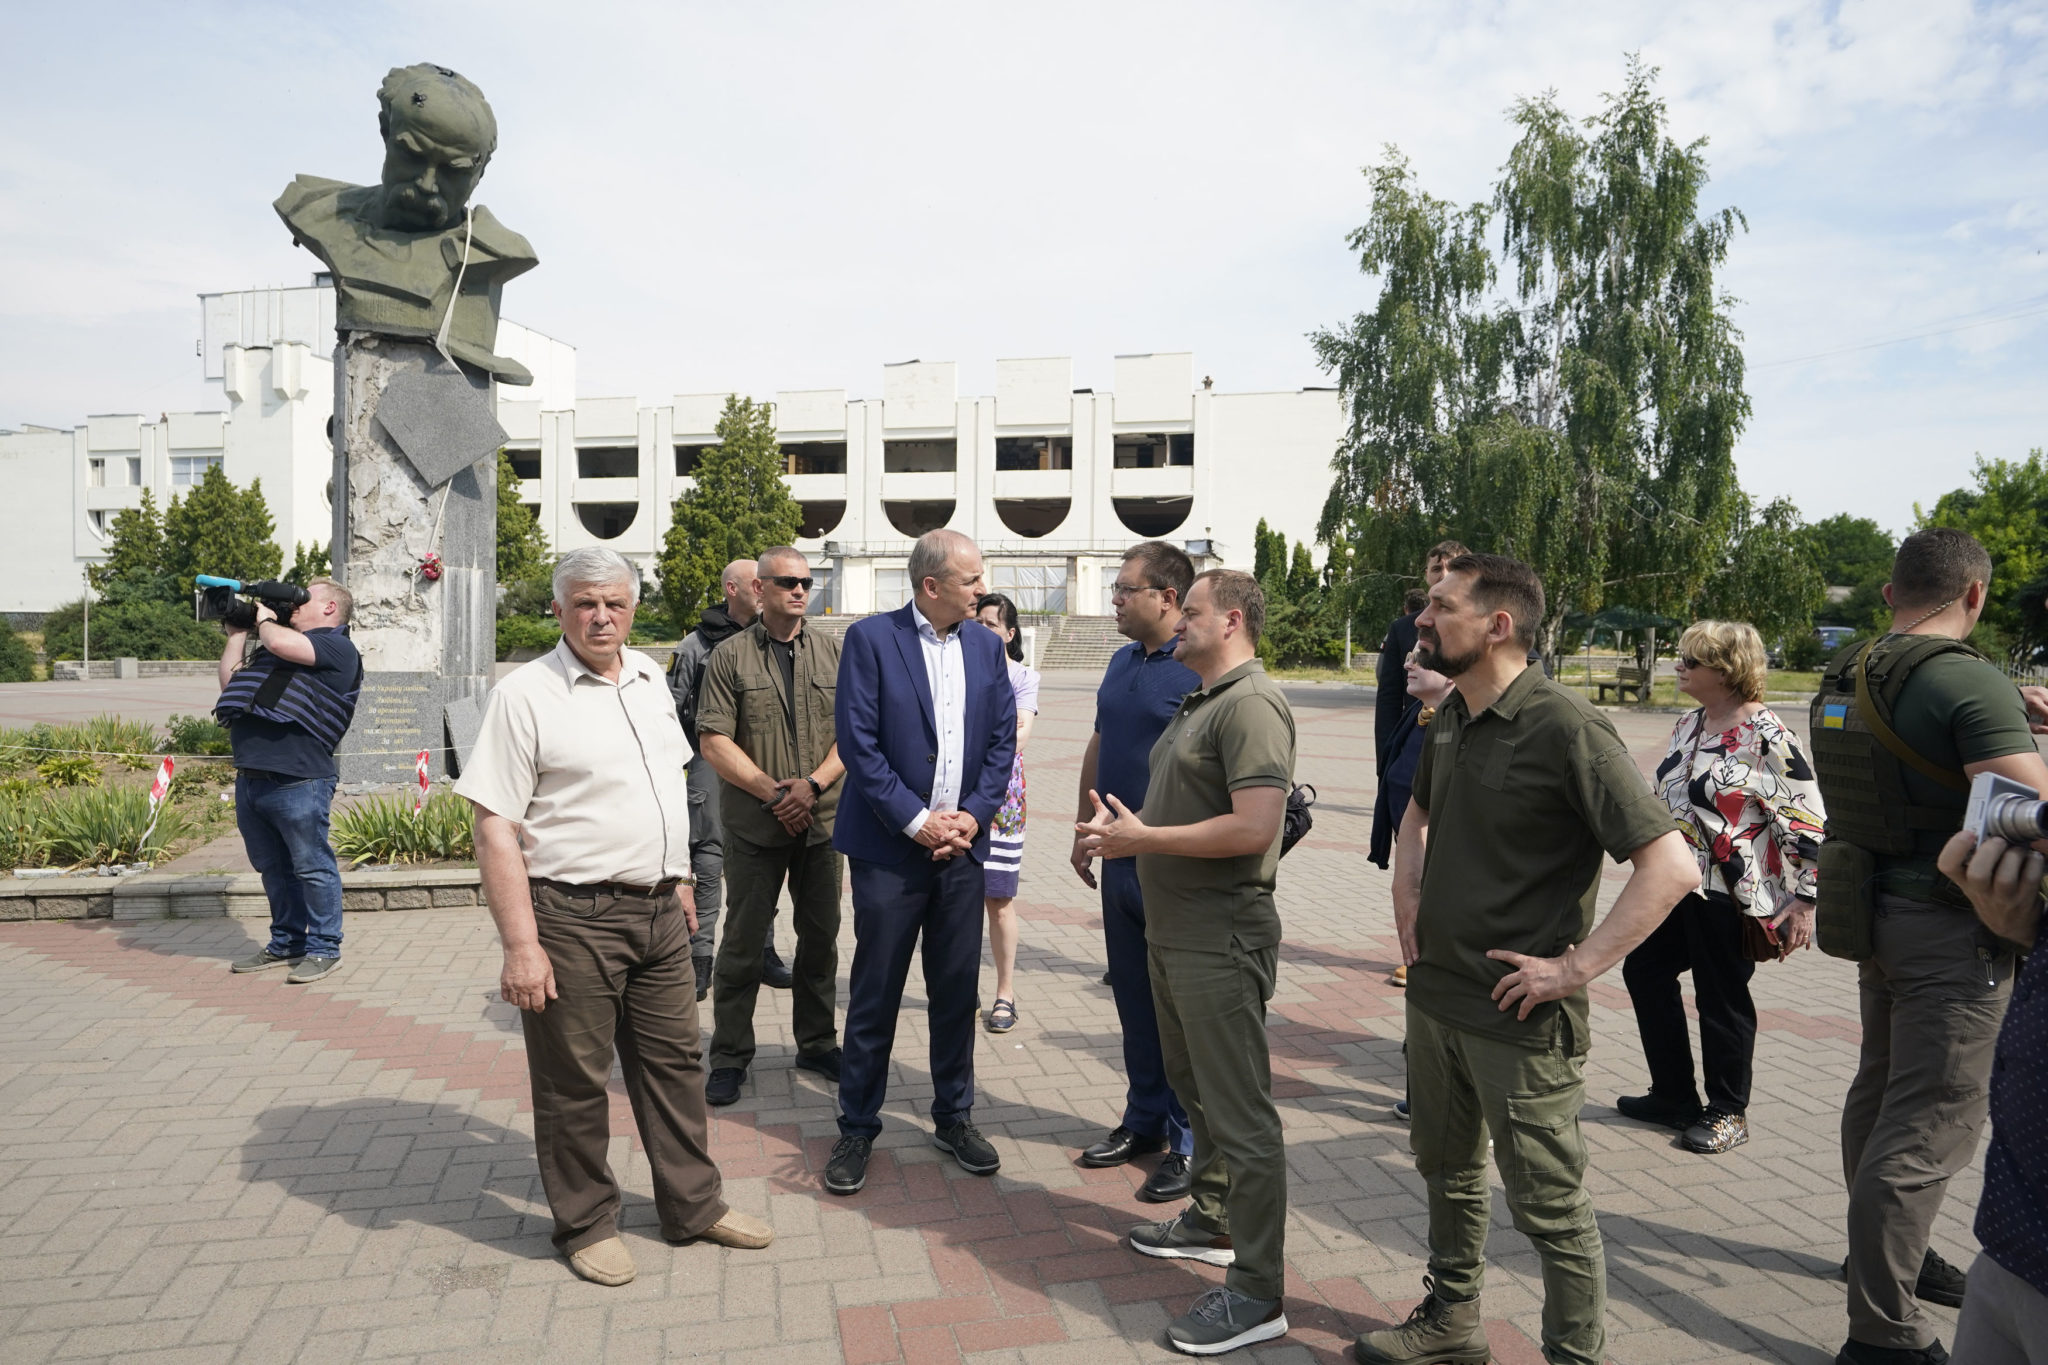 Taoiseach Michael Martin with local officials viewing the damage to the Borodyanka area, including the statue of poet Taras Shevchenko, 06-07-2022. Image: Niall Carson/PA Wire/RollingNews